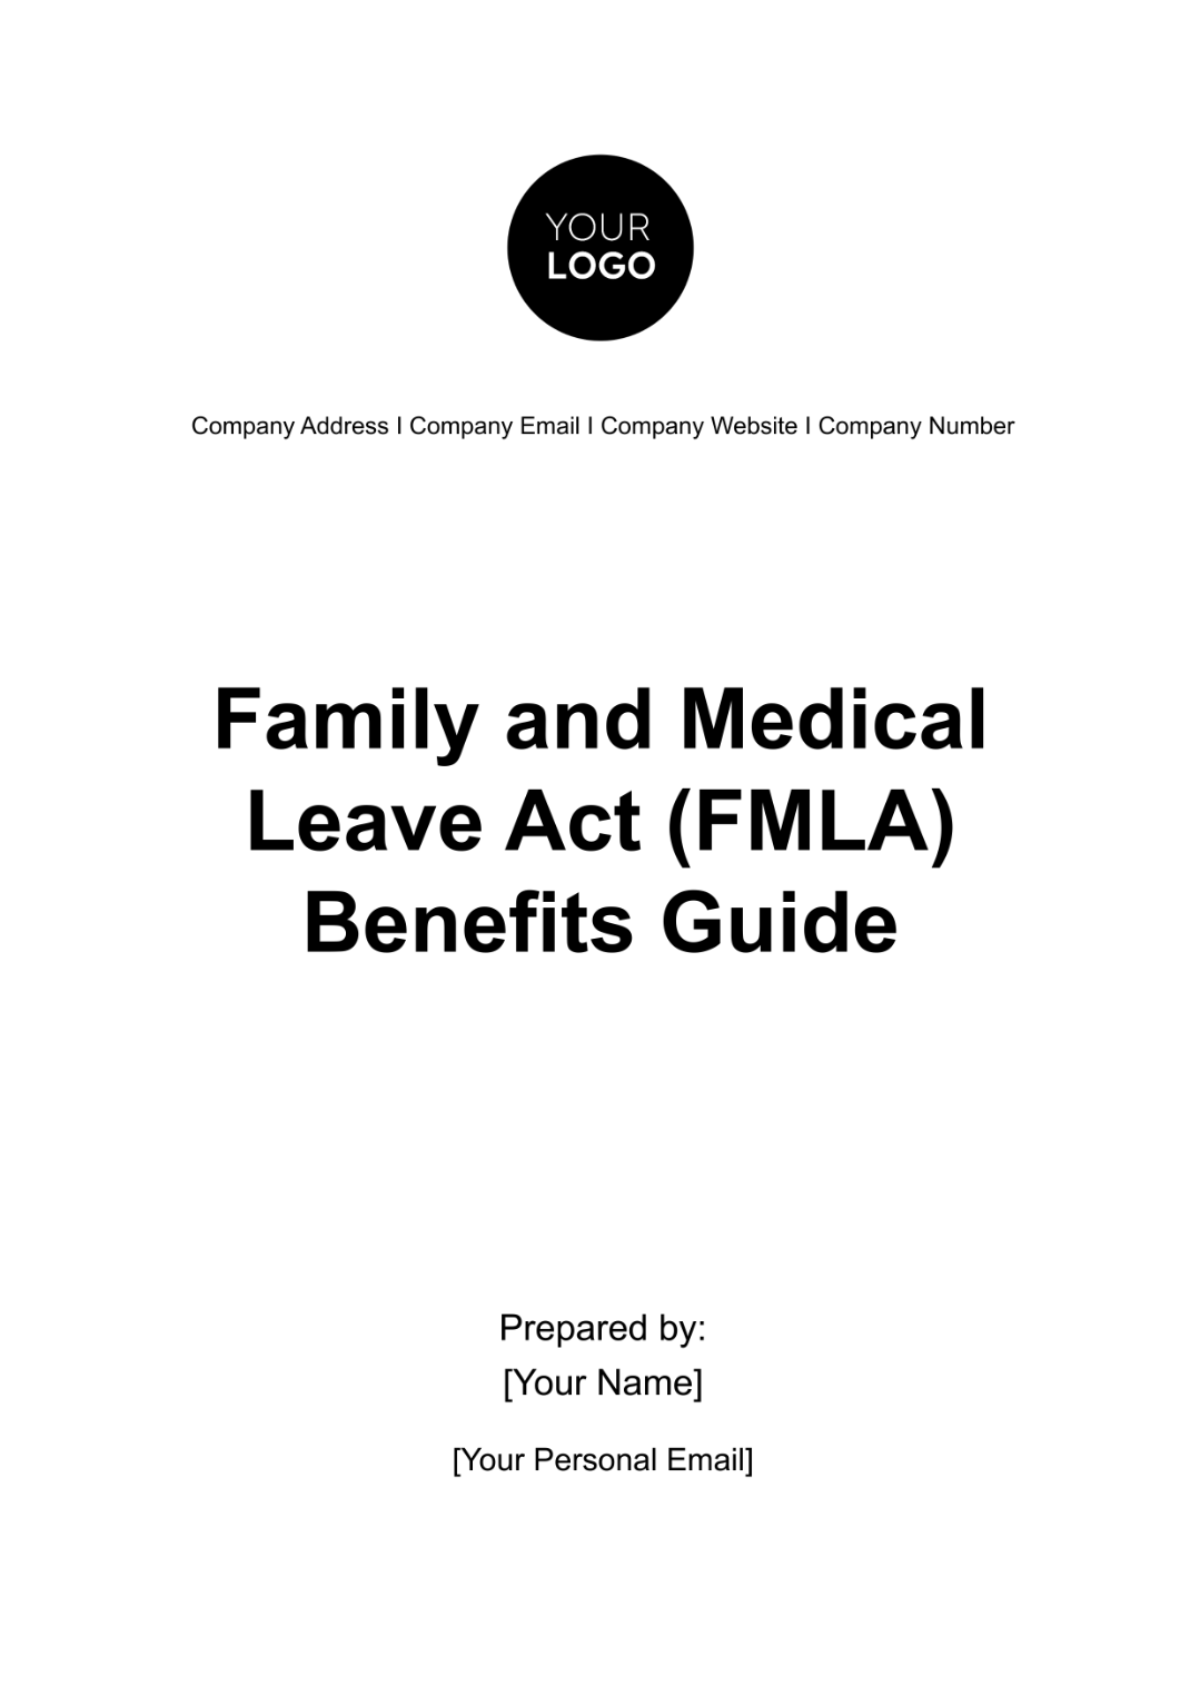 Family and Medical Leave Act (FMLA) Benefits Guide HR Template